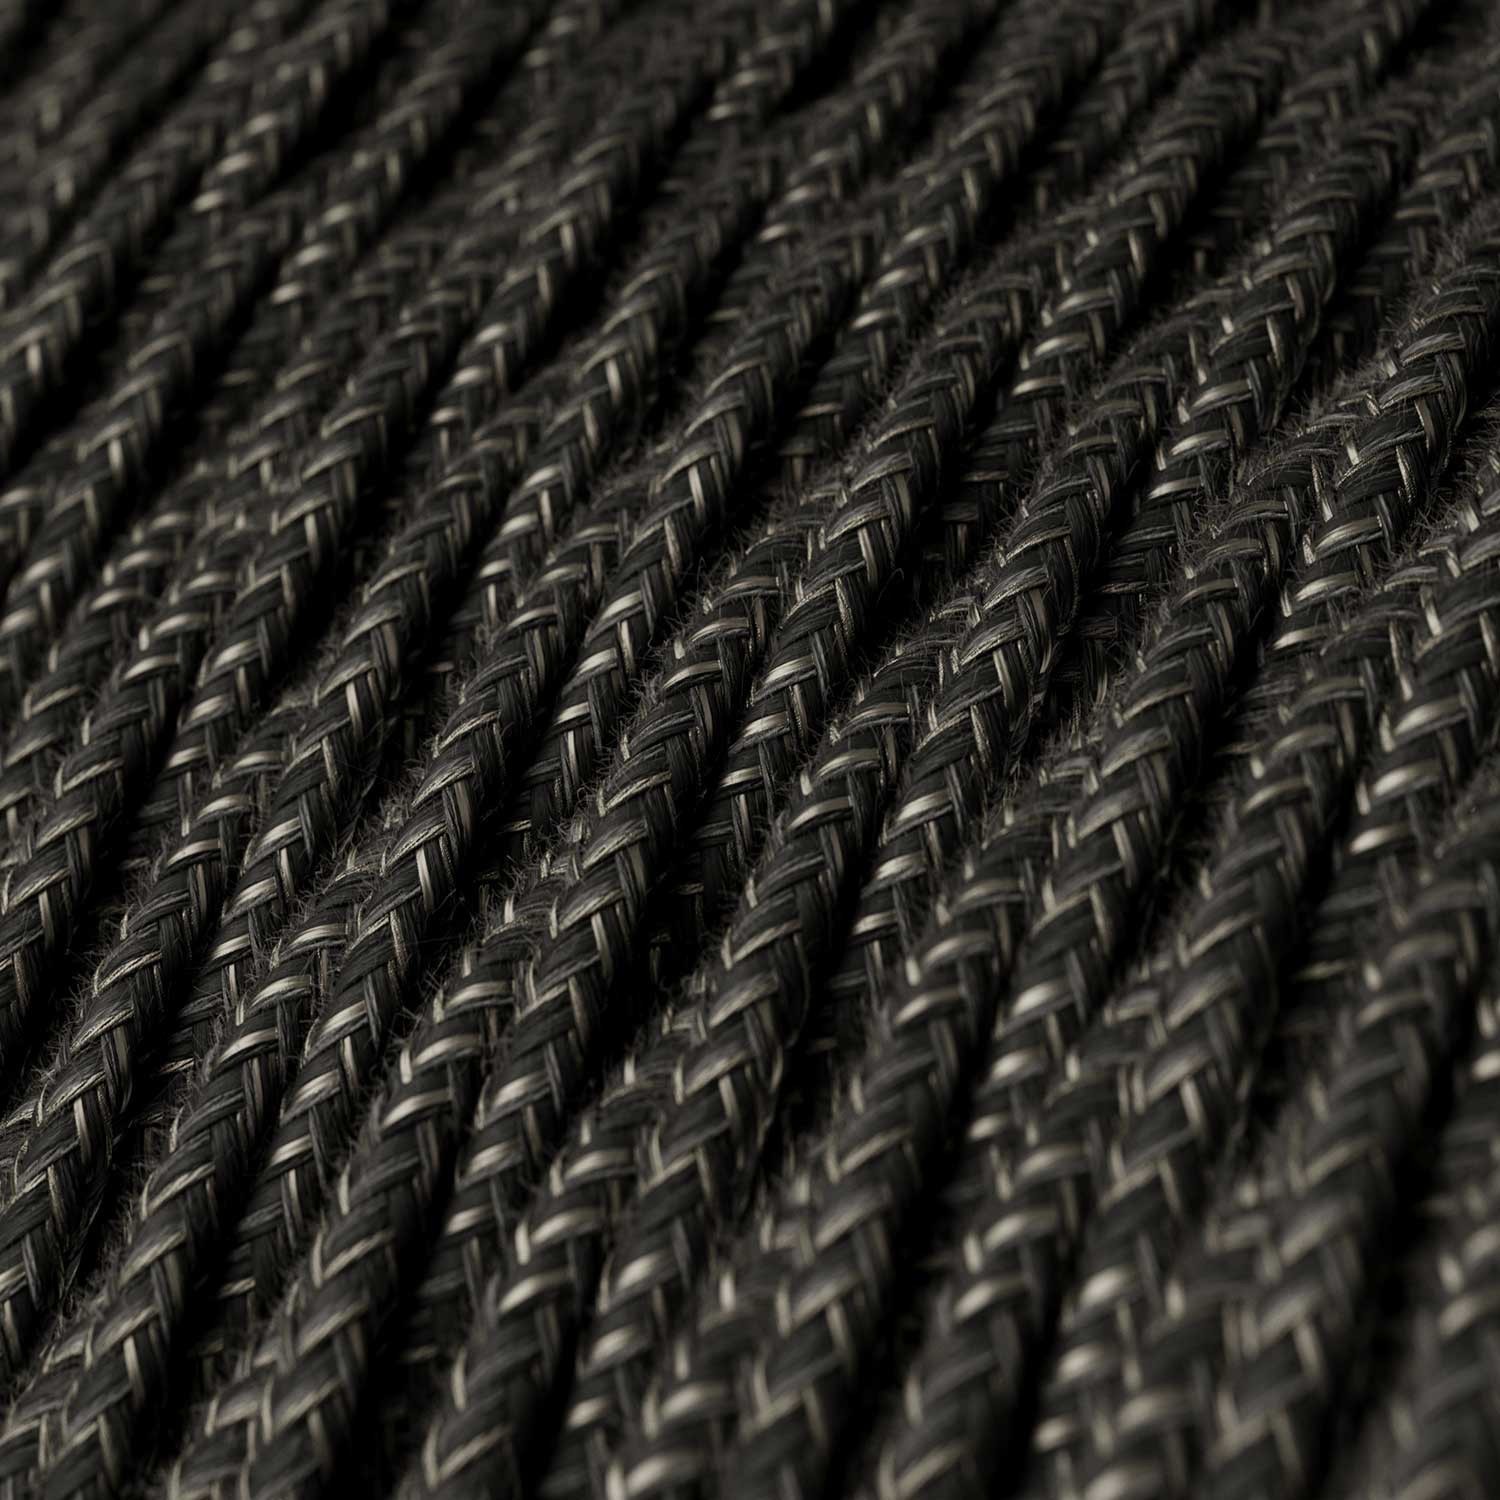 Twisted Electric Cable covered by Natural Linen TN03 Anthracite